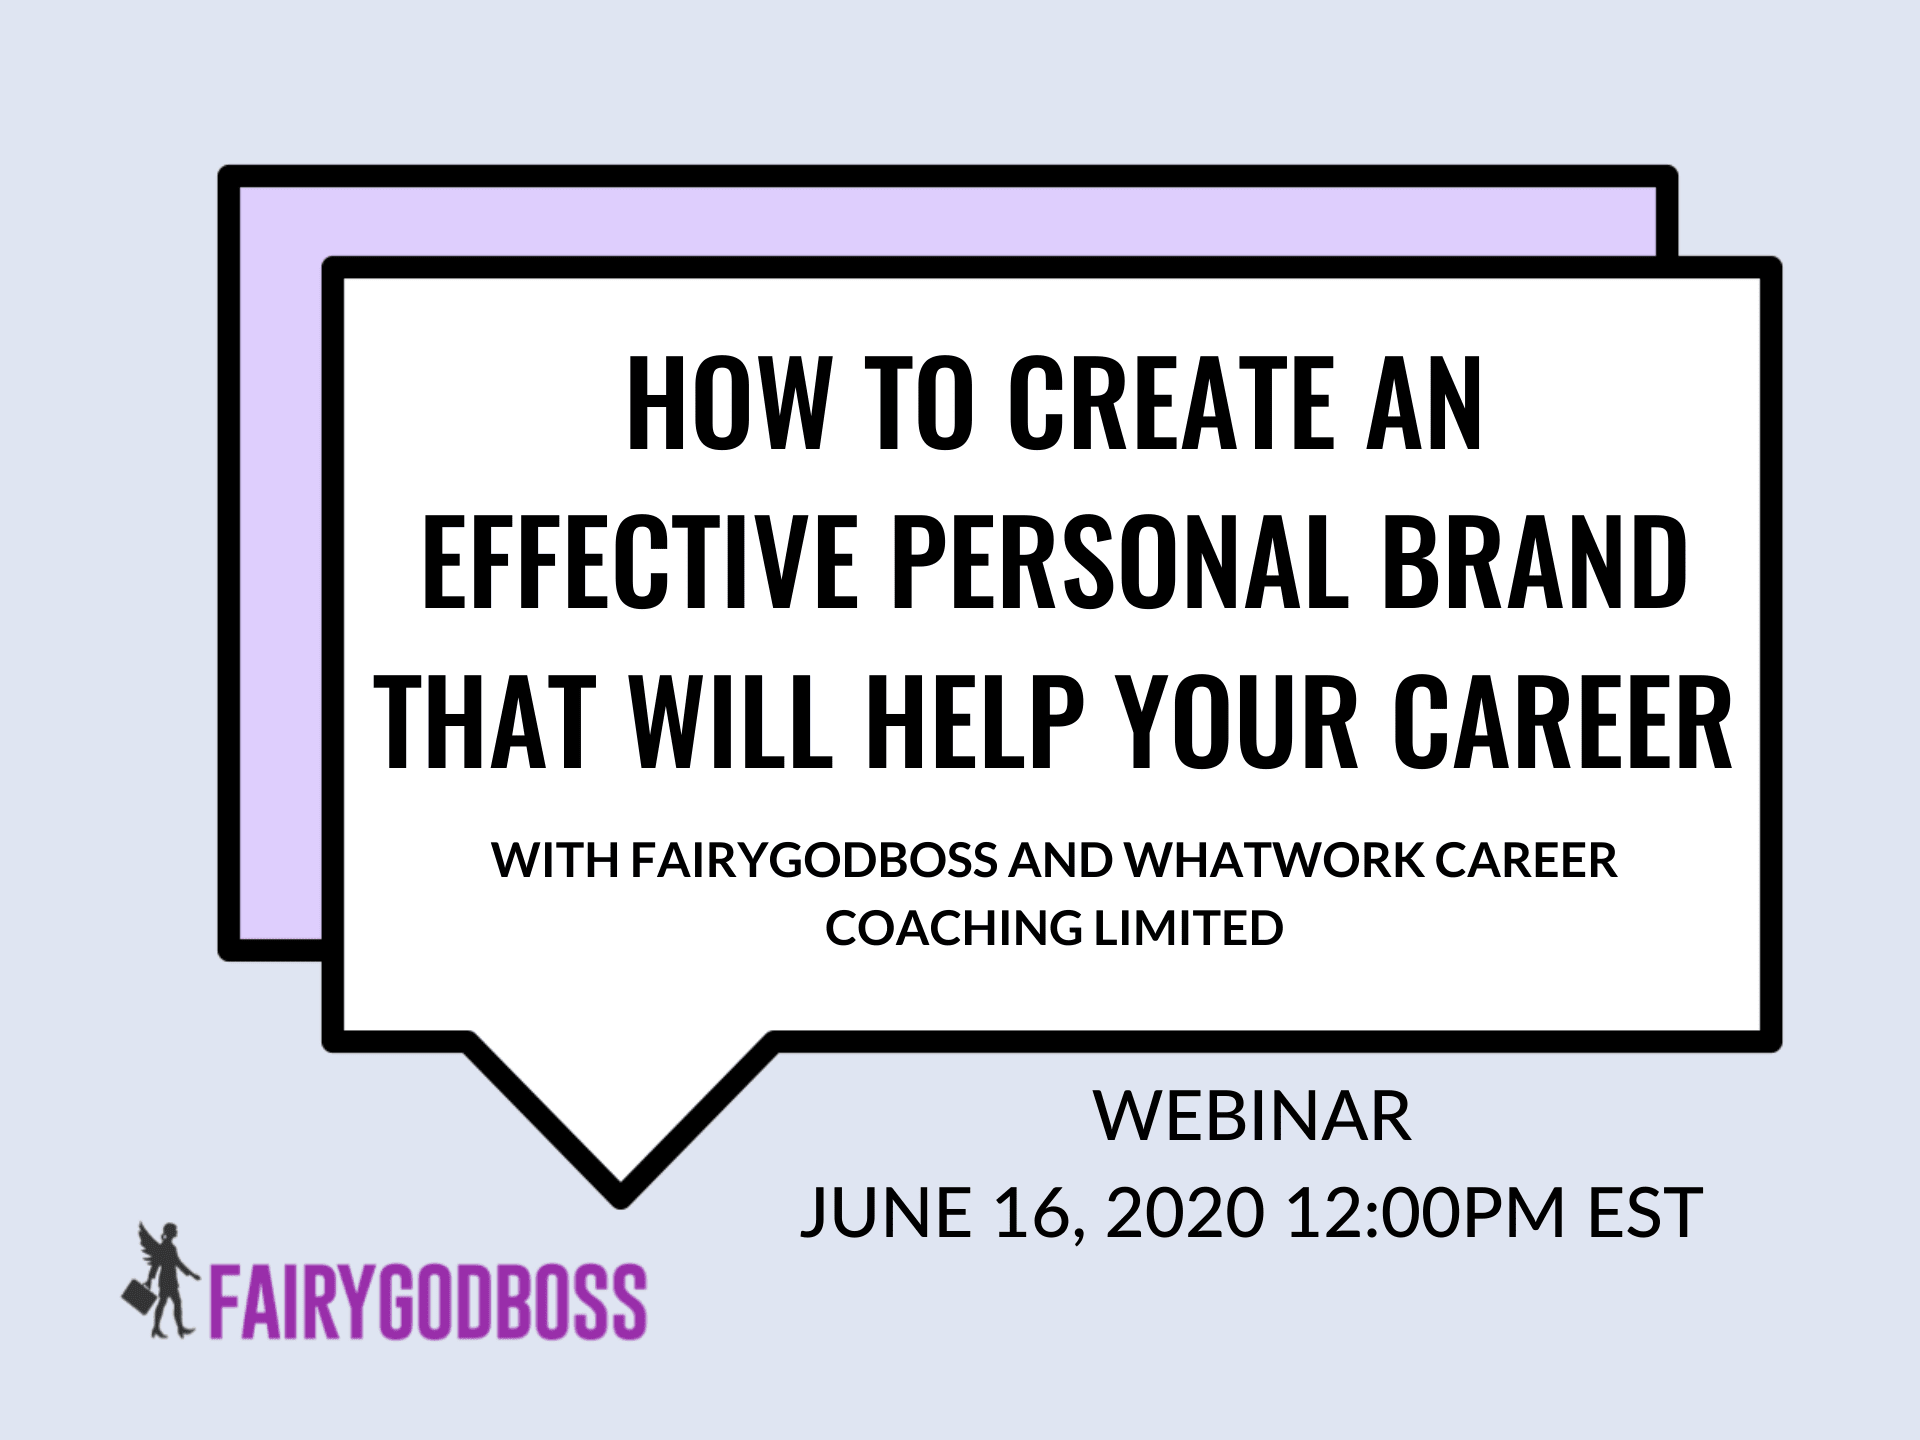 How To Create An Effective Personal Brand That Will Help Your Career